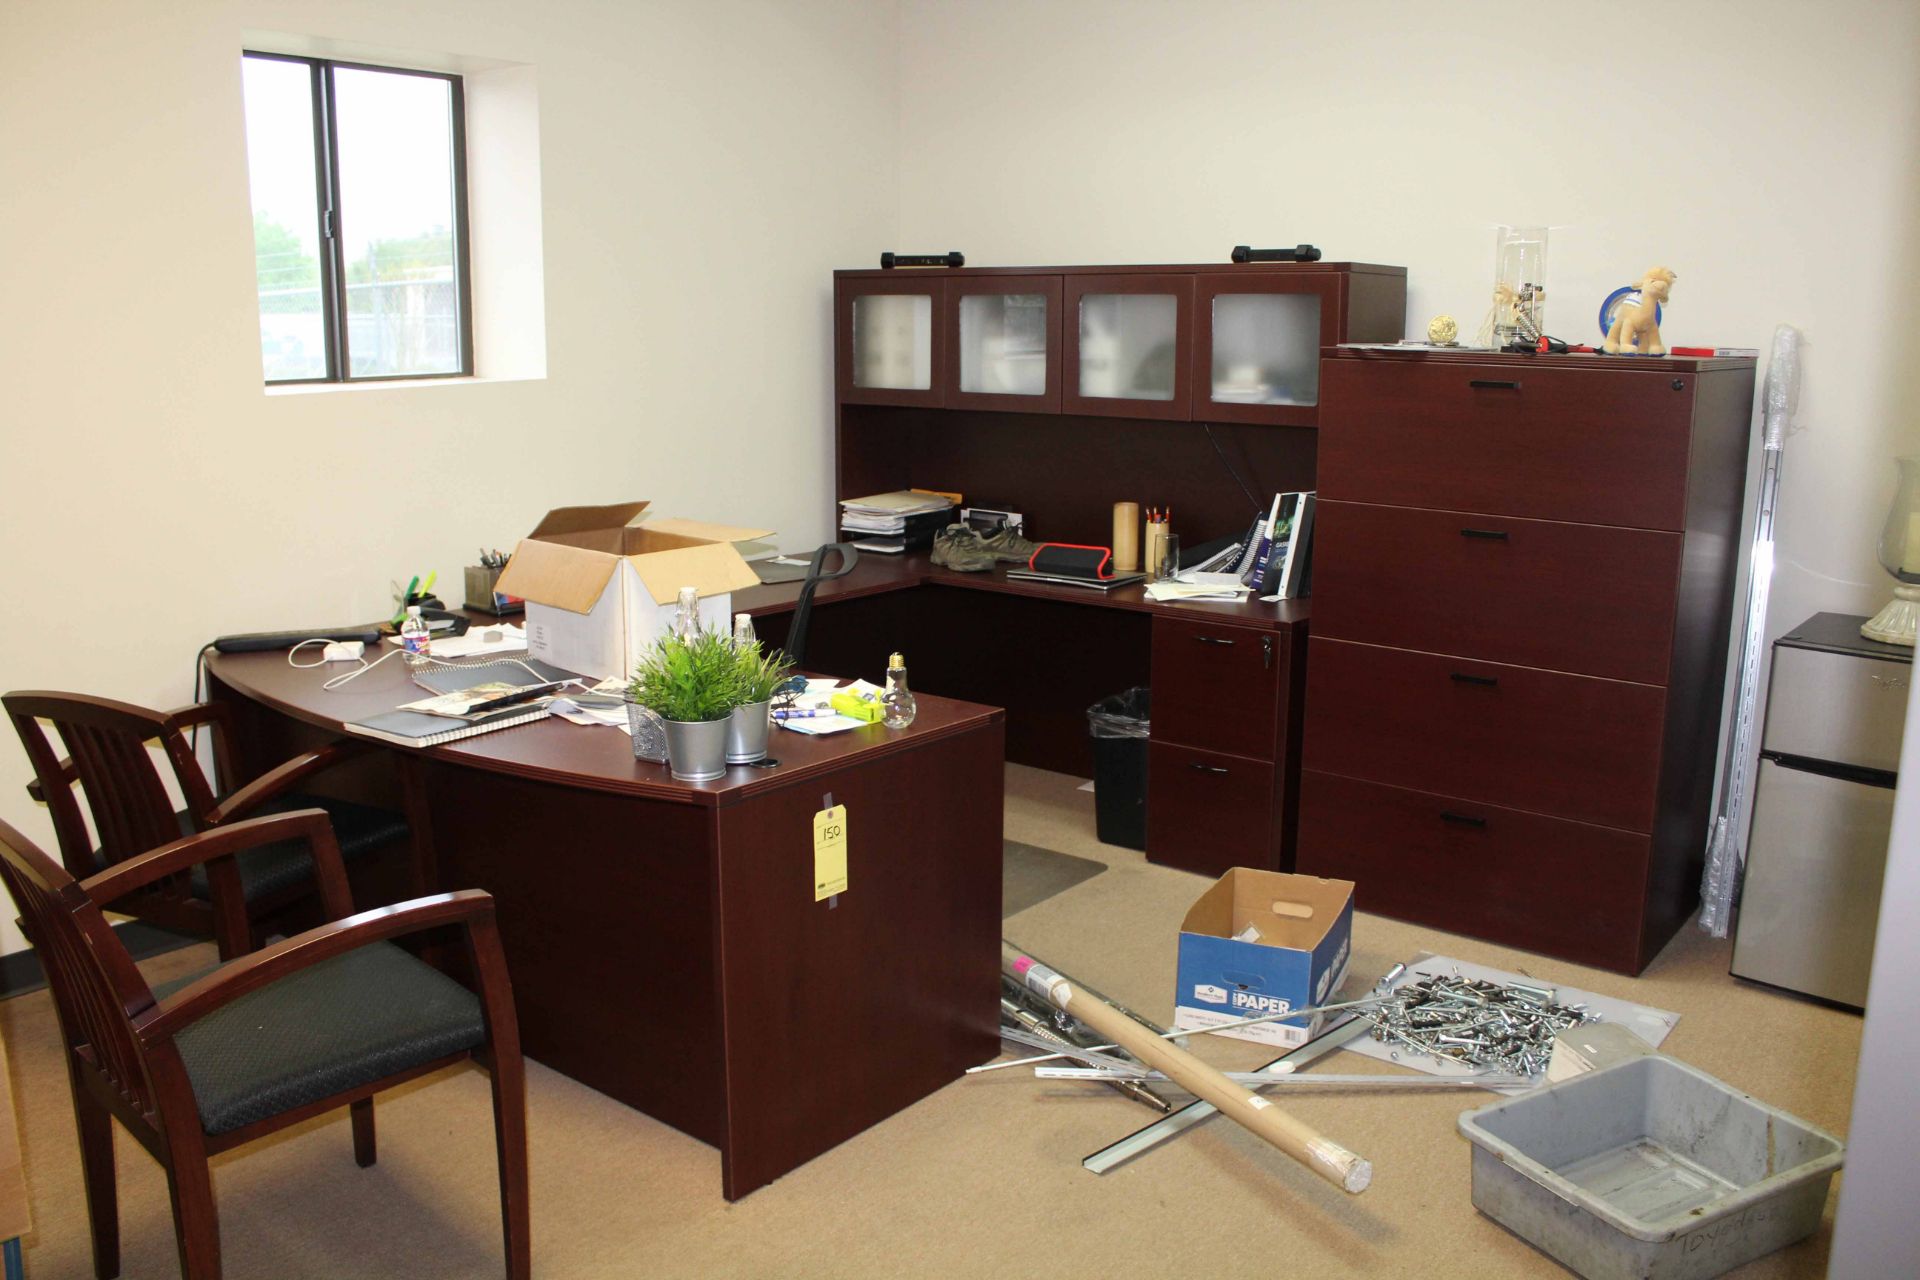 LOT CONTENTS OF OFFICE: furniture & refrigerator